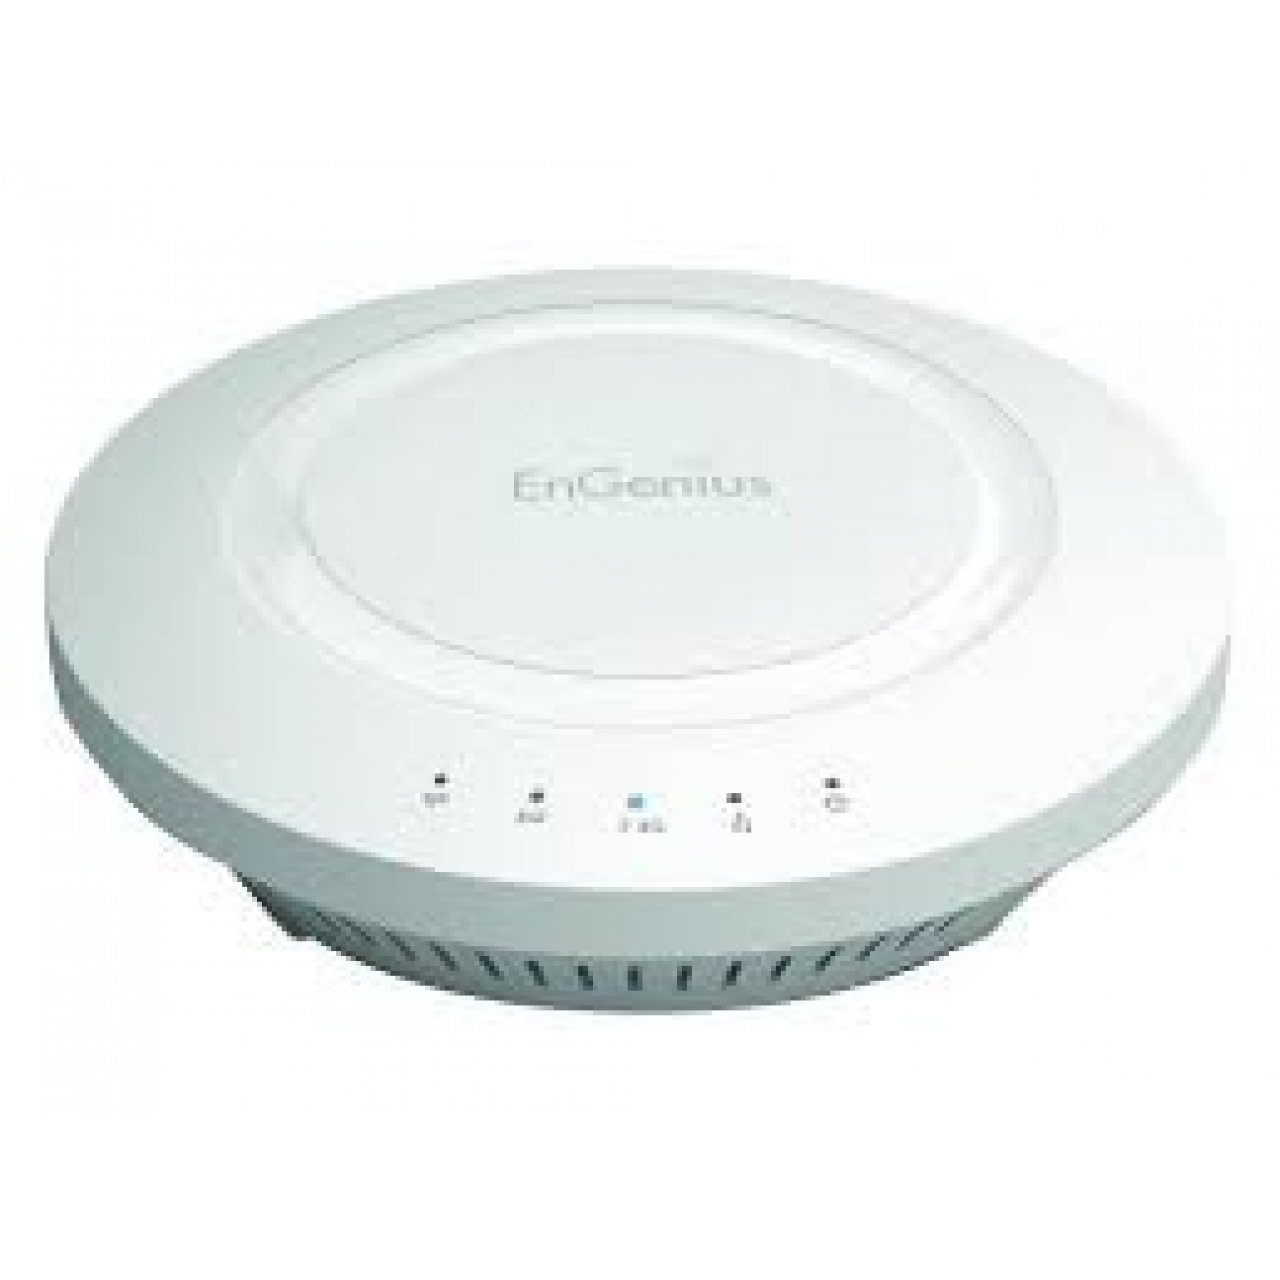 ENGENIUS EAP600 11a-b-g-n 300Mbps Dual-Band Indoor Wireless Gigabit Access Point